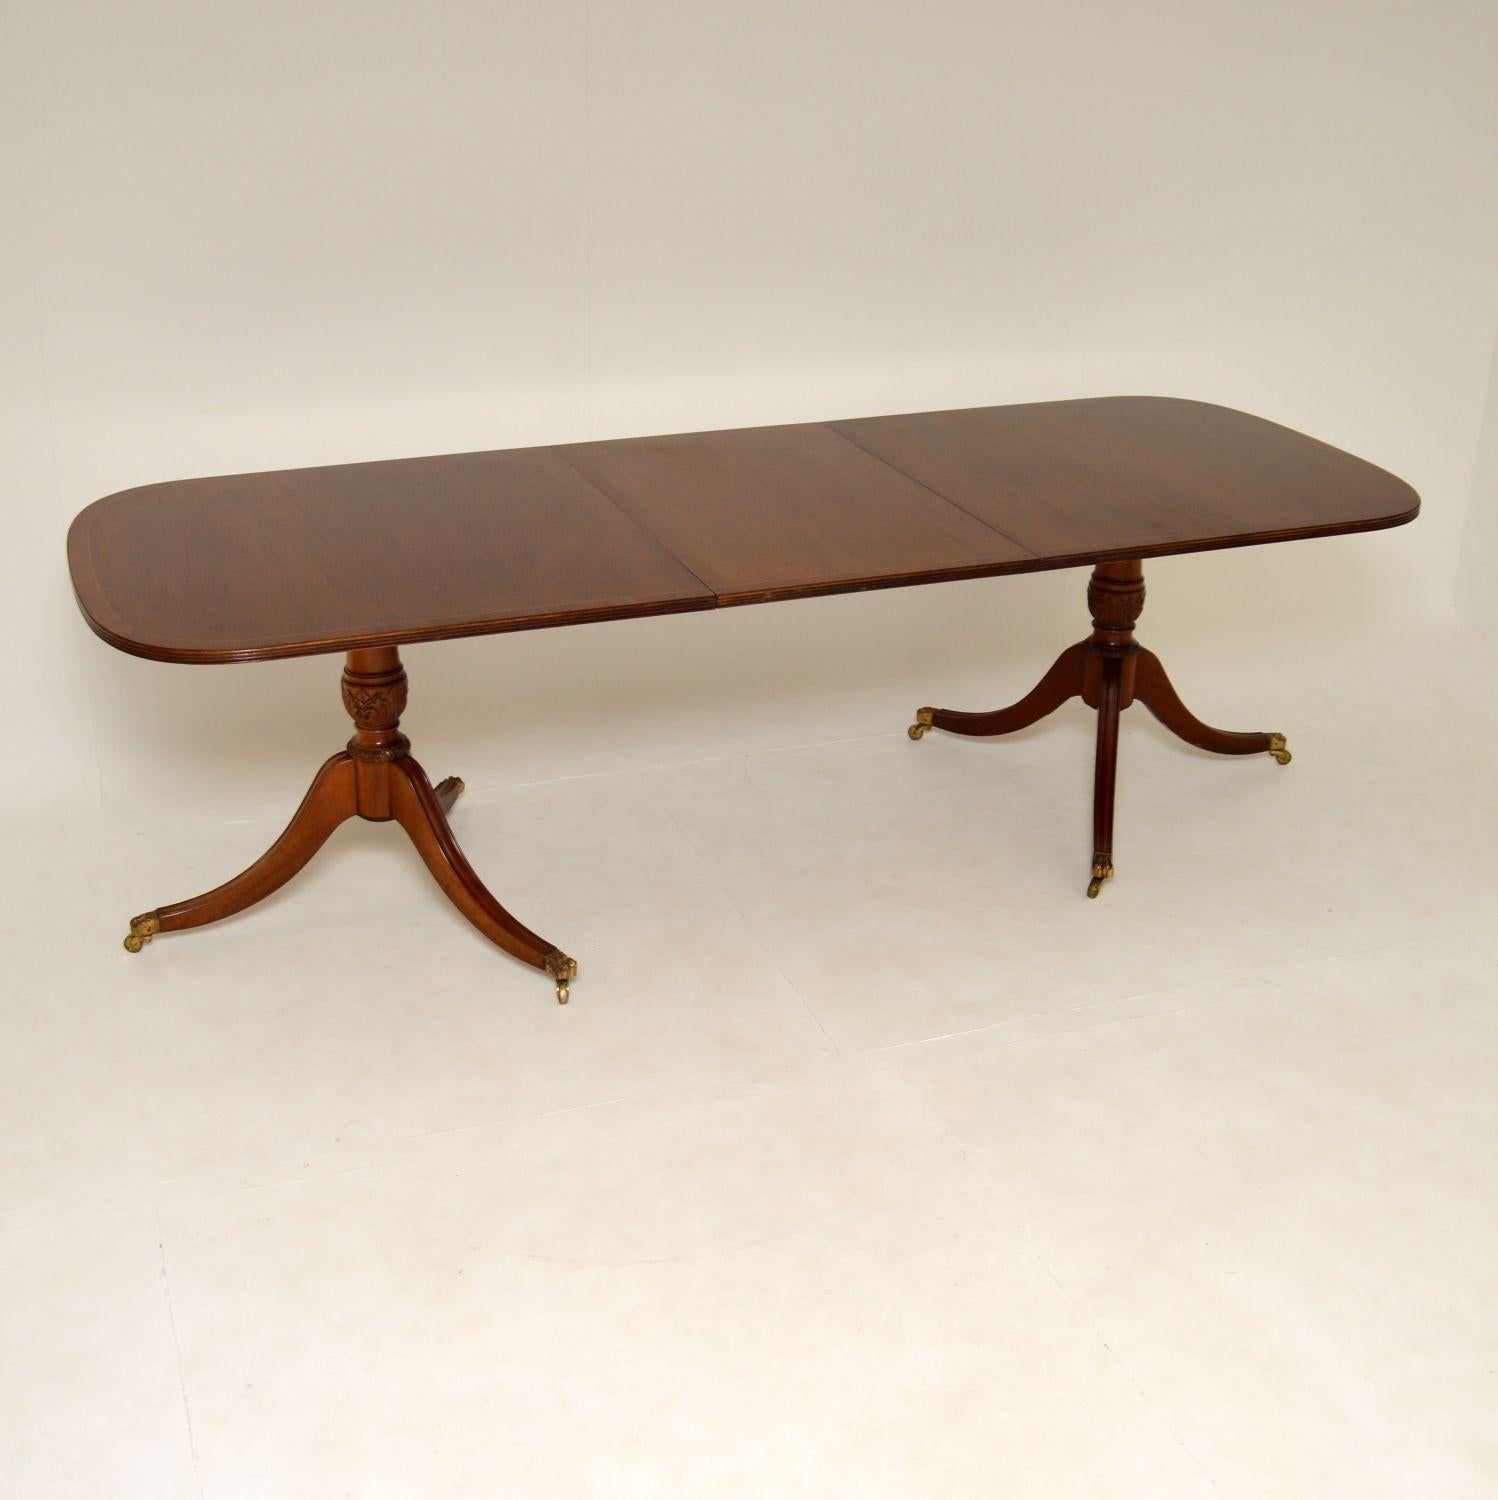 A beautiful and elegant mahogany dining table, in the antique Regency style. This was made in England, it dates from around the 1930’s.

The quality is excellent, this is very well built and sits on two wonderful tripod bases. The bases have